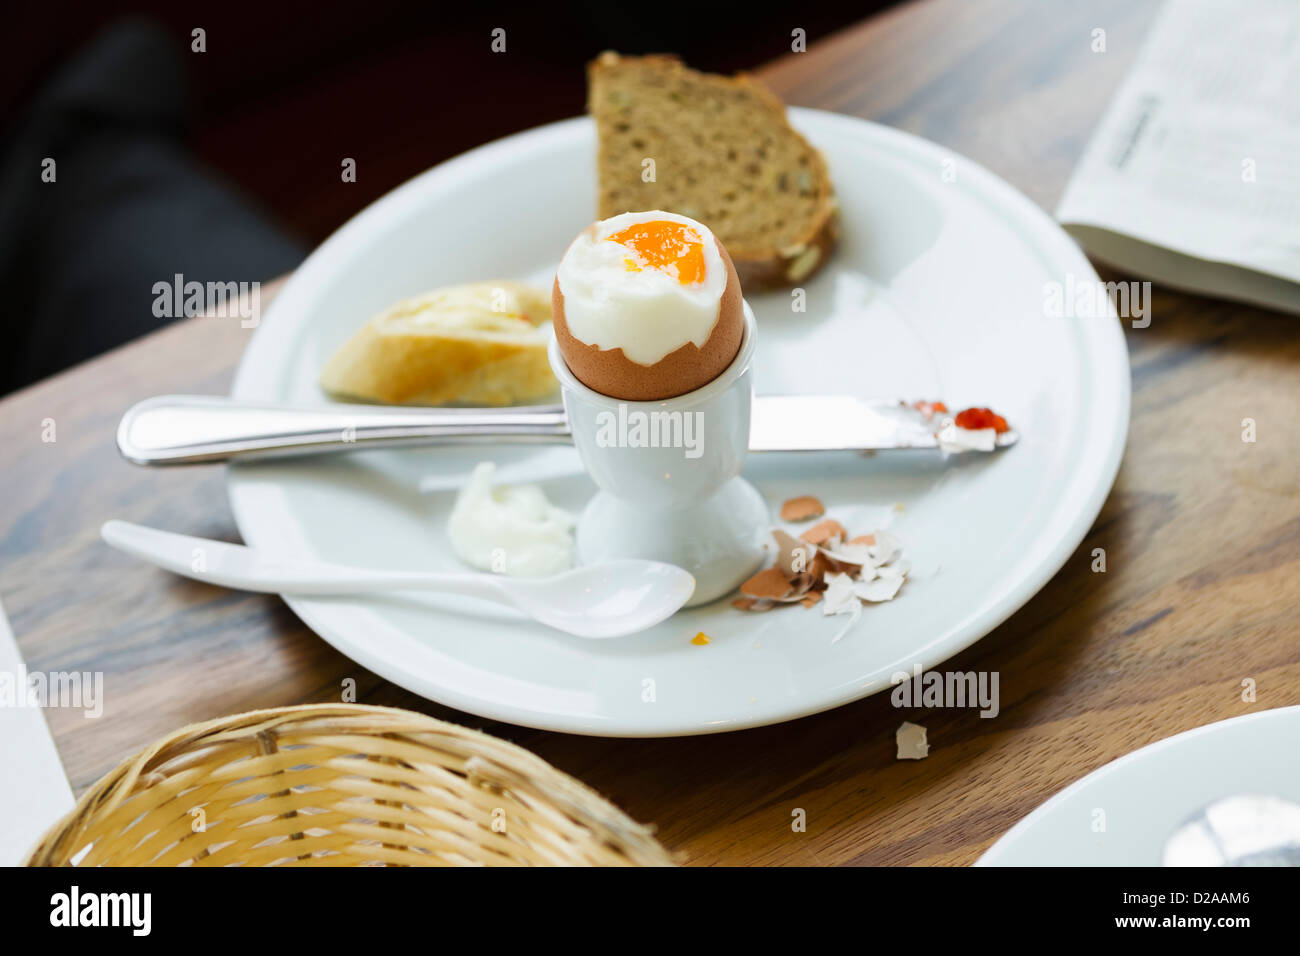 Plate of egg and toast Stock Photo